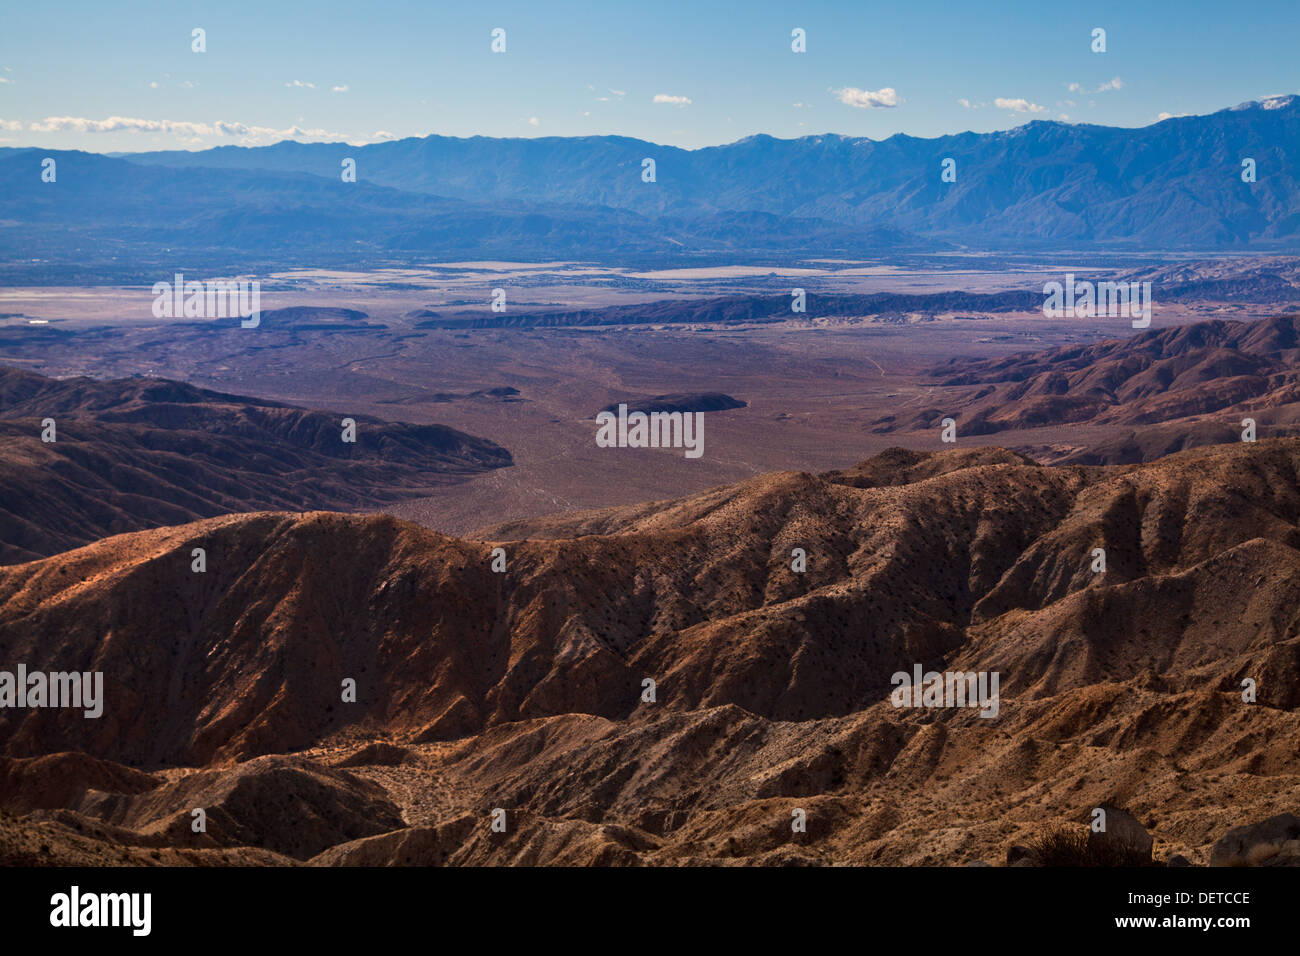 San Andreas Fault seen from the Joshua Tree National Park in California, USA Stock Photo